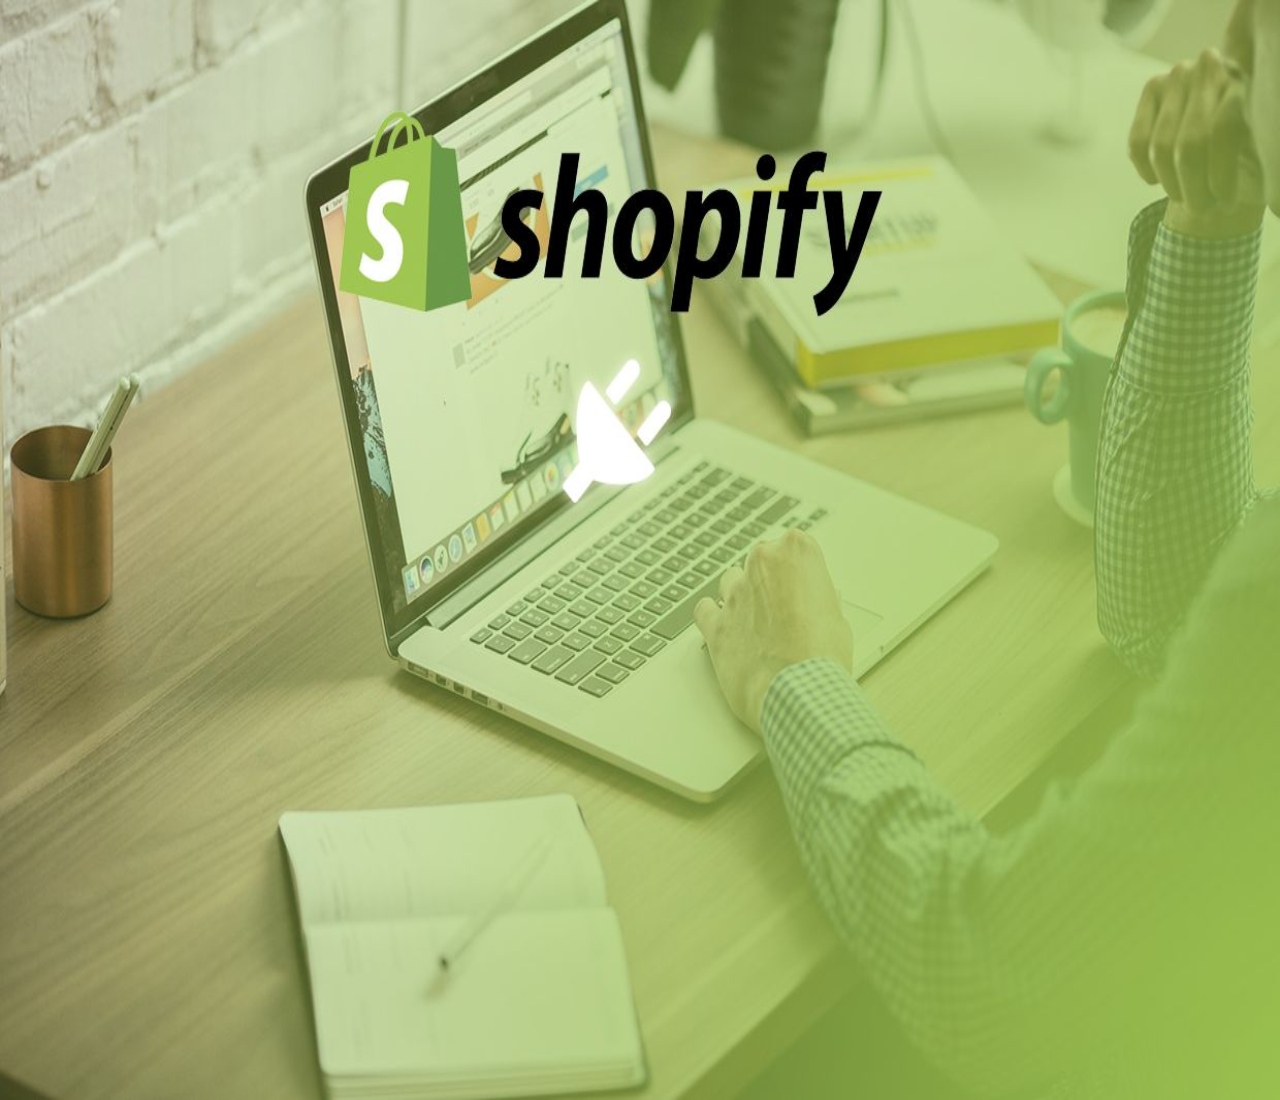 Shopify design and development in New York